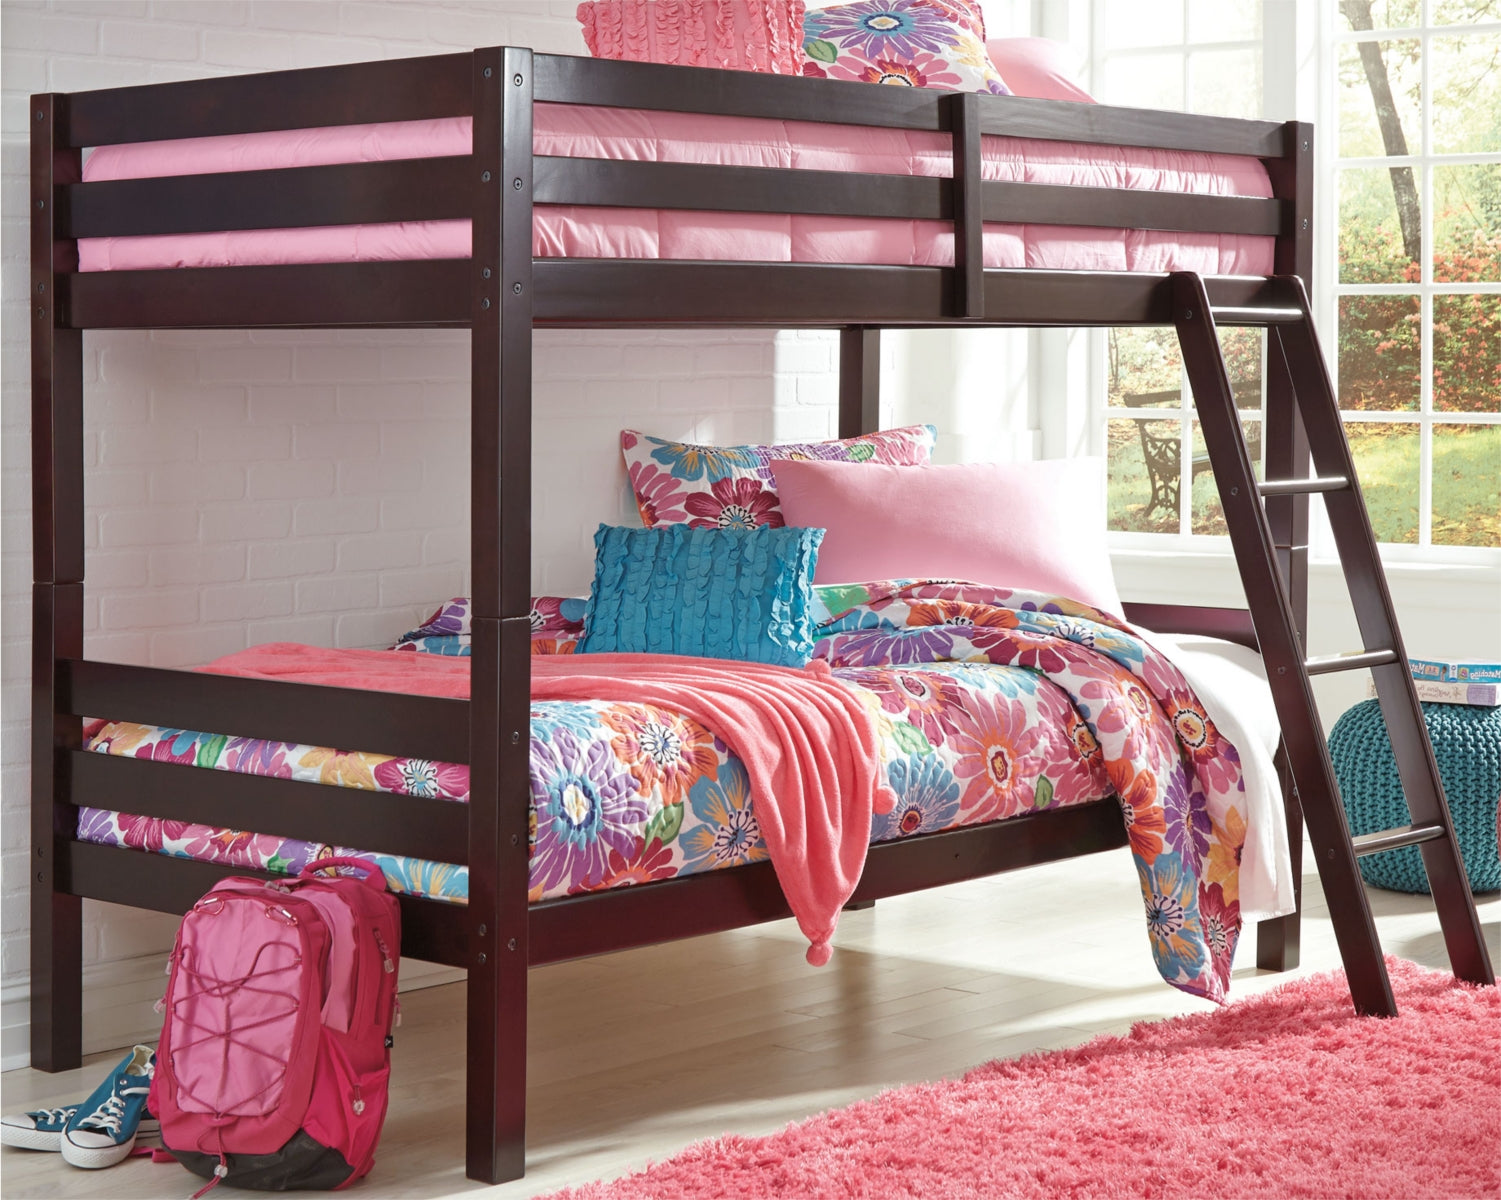 Halanton Twin over Twin Bunk Bed with Ladder